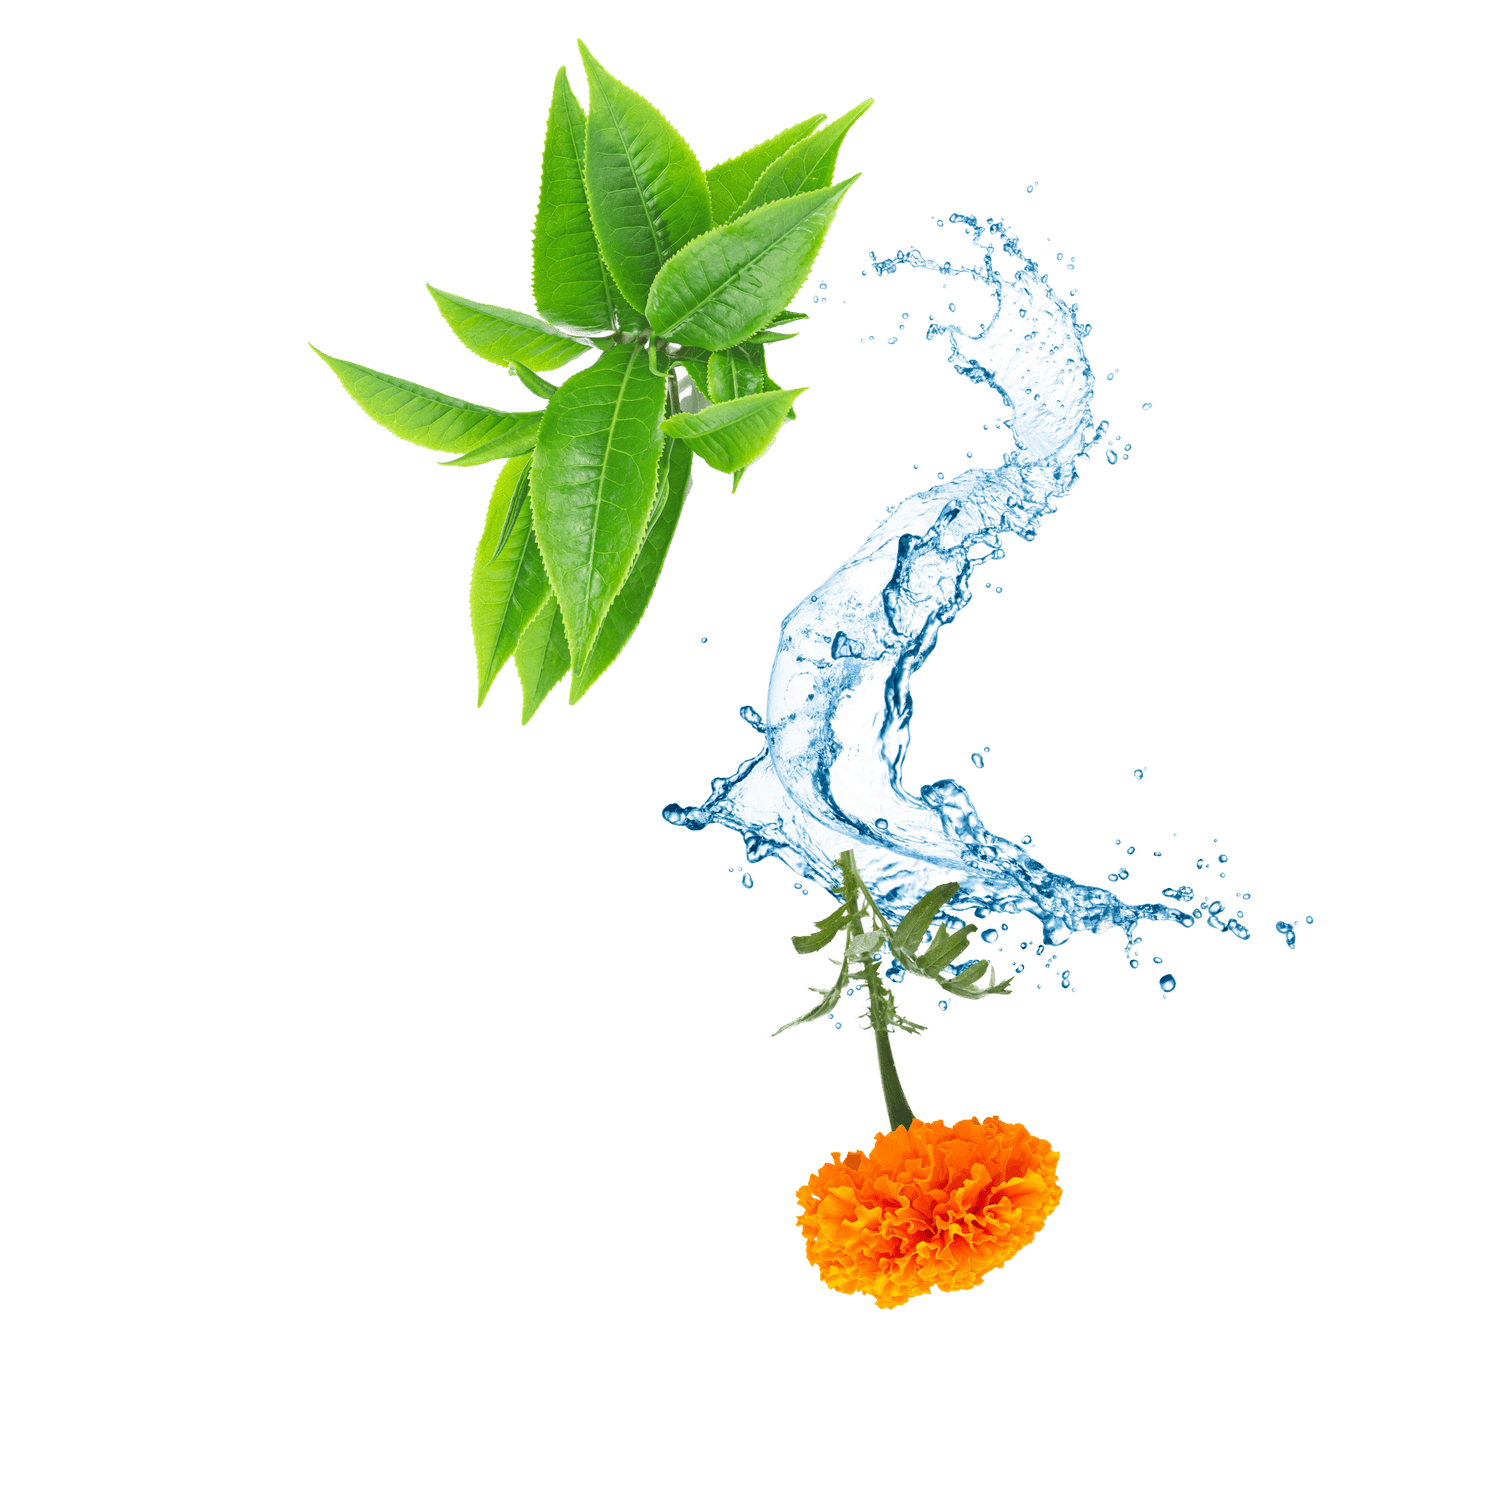 Green tea leaves, marigold flower, and a splash of water on a white background